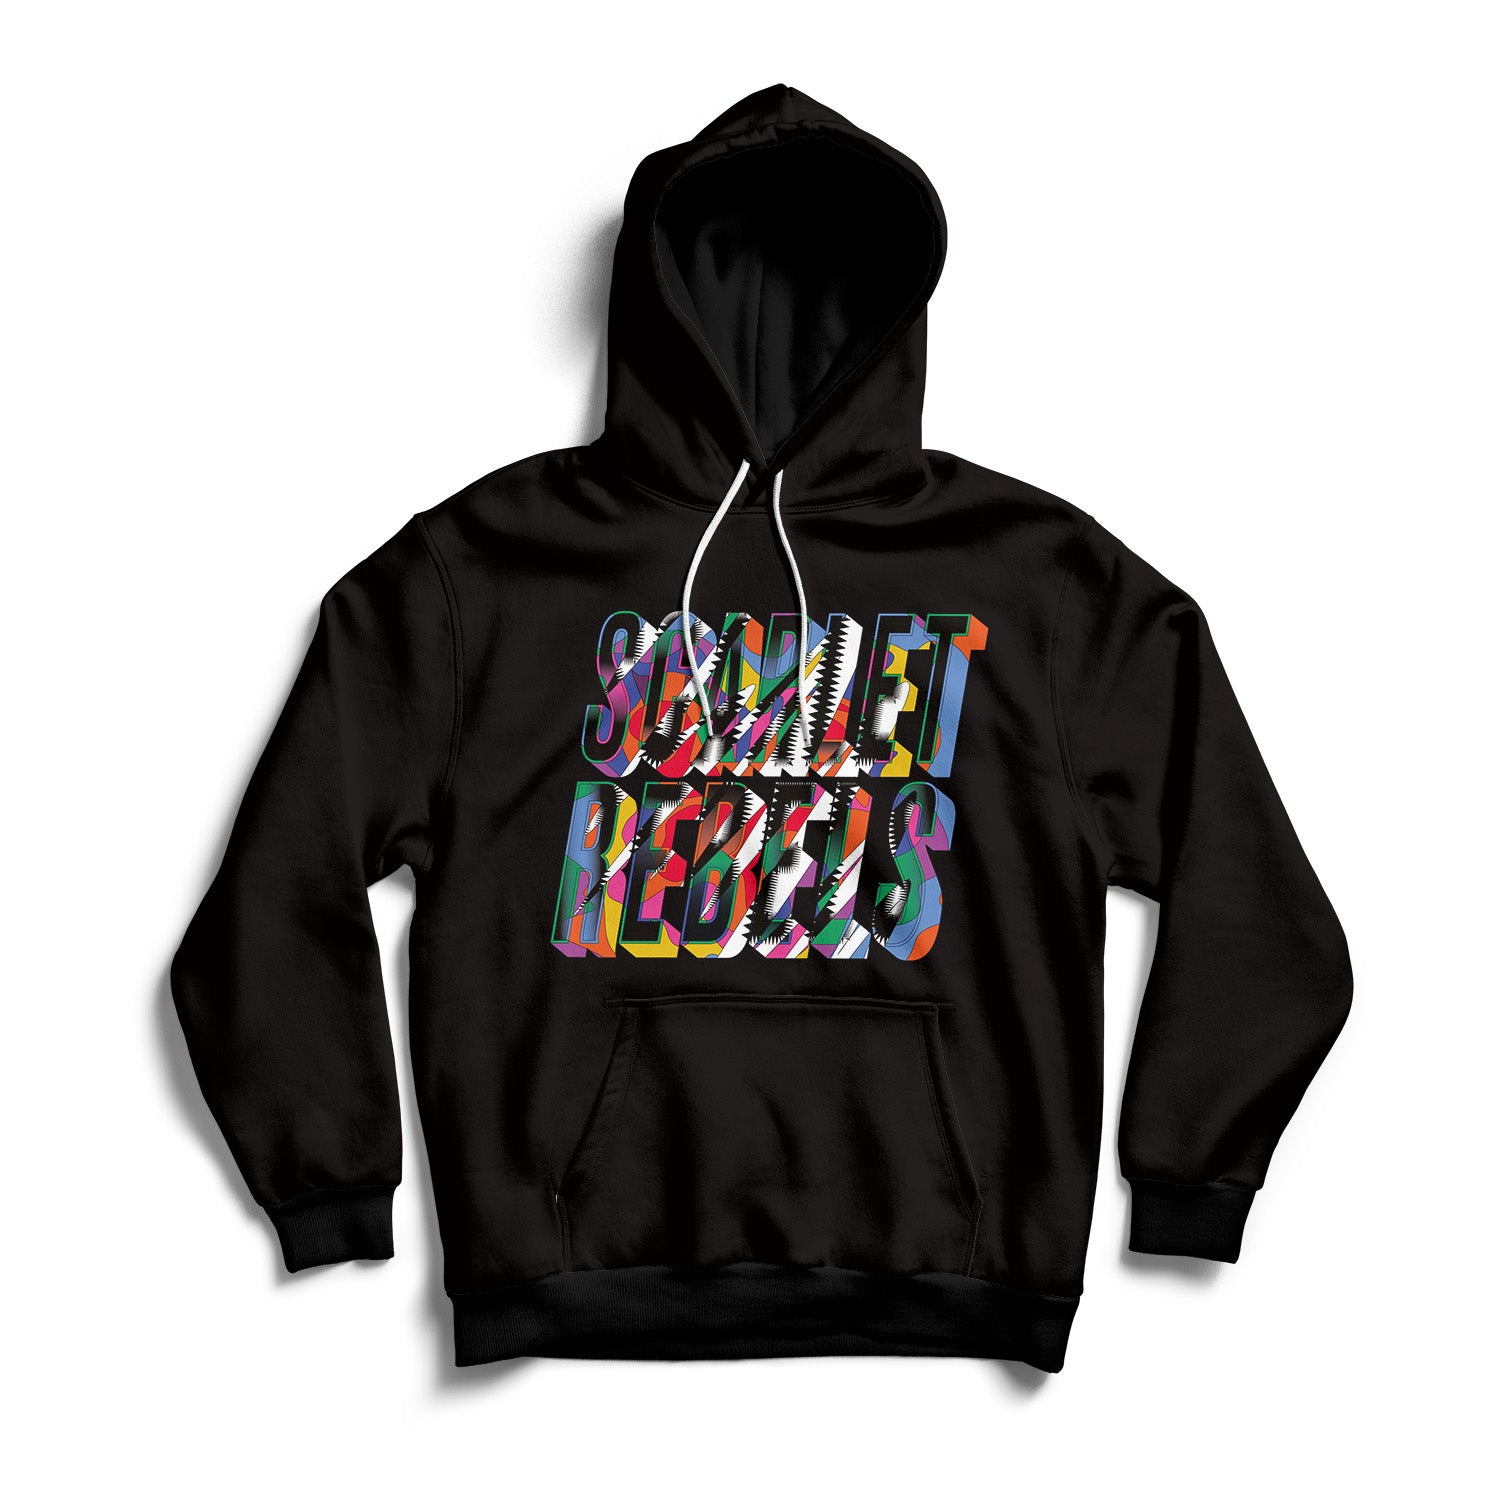 Scarlet Rebels "Where The Colours Meet" Pullover Hoodie - PRE-ORDER